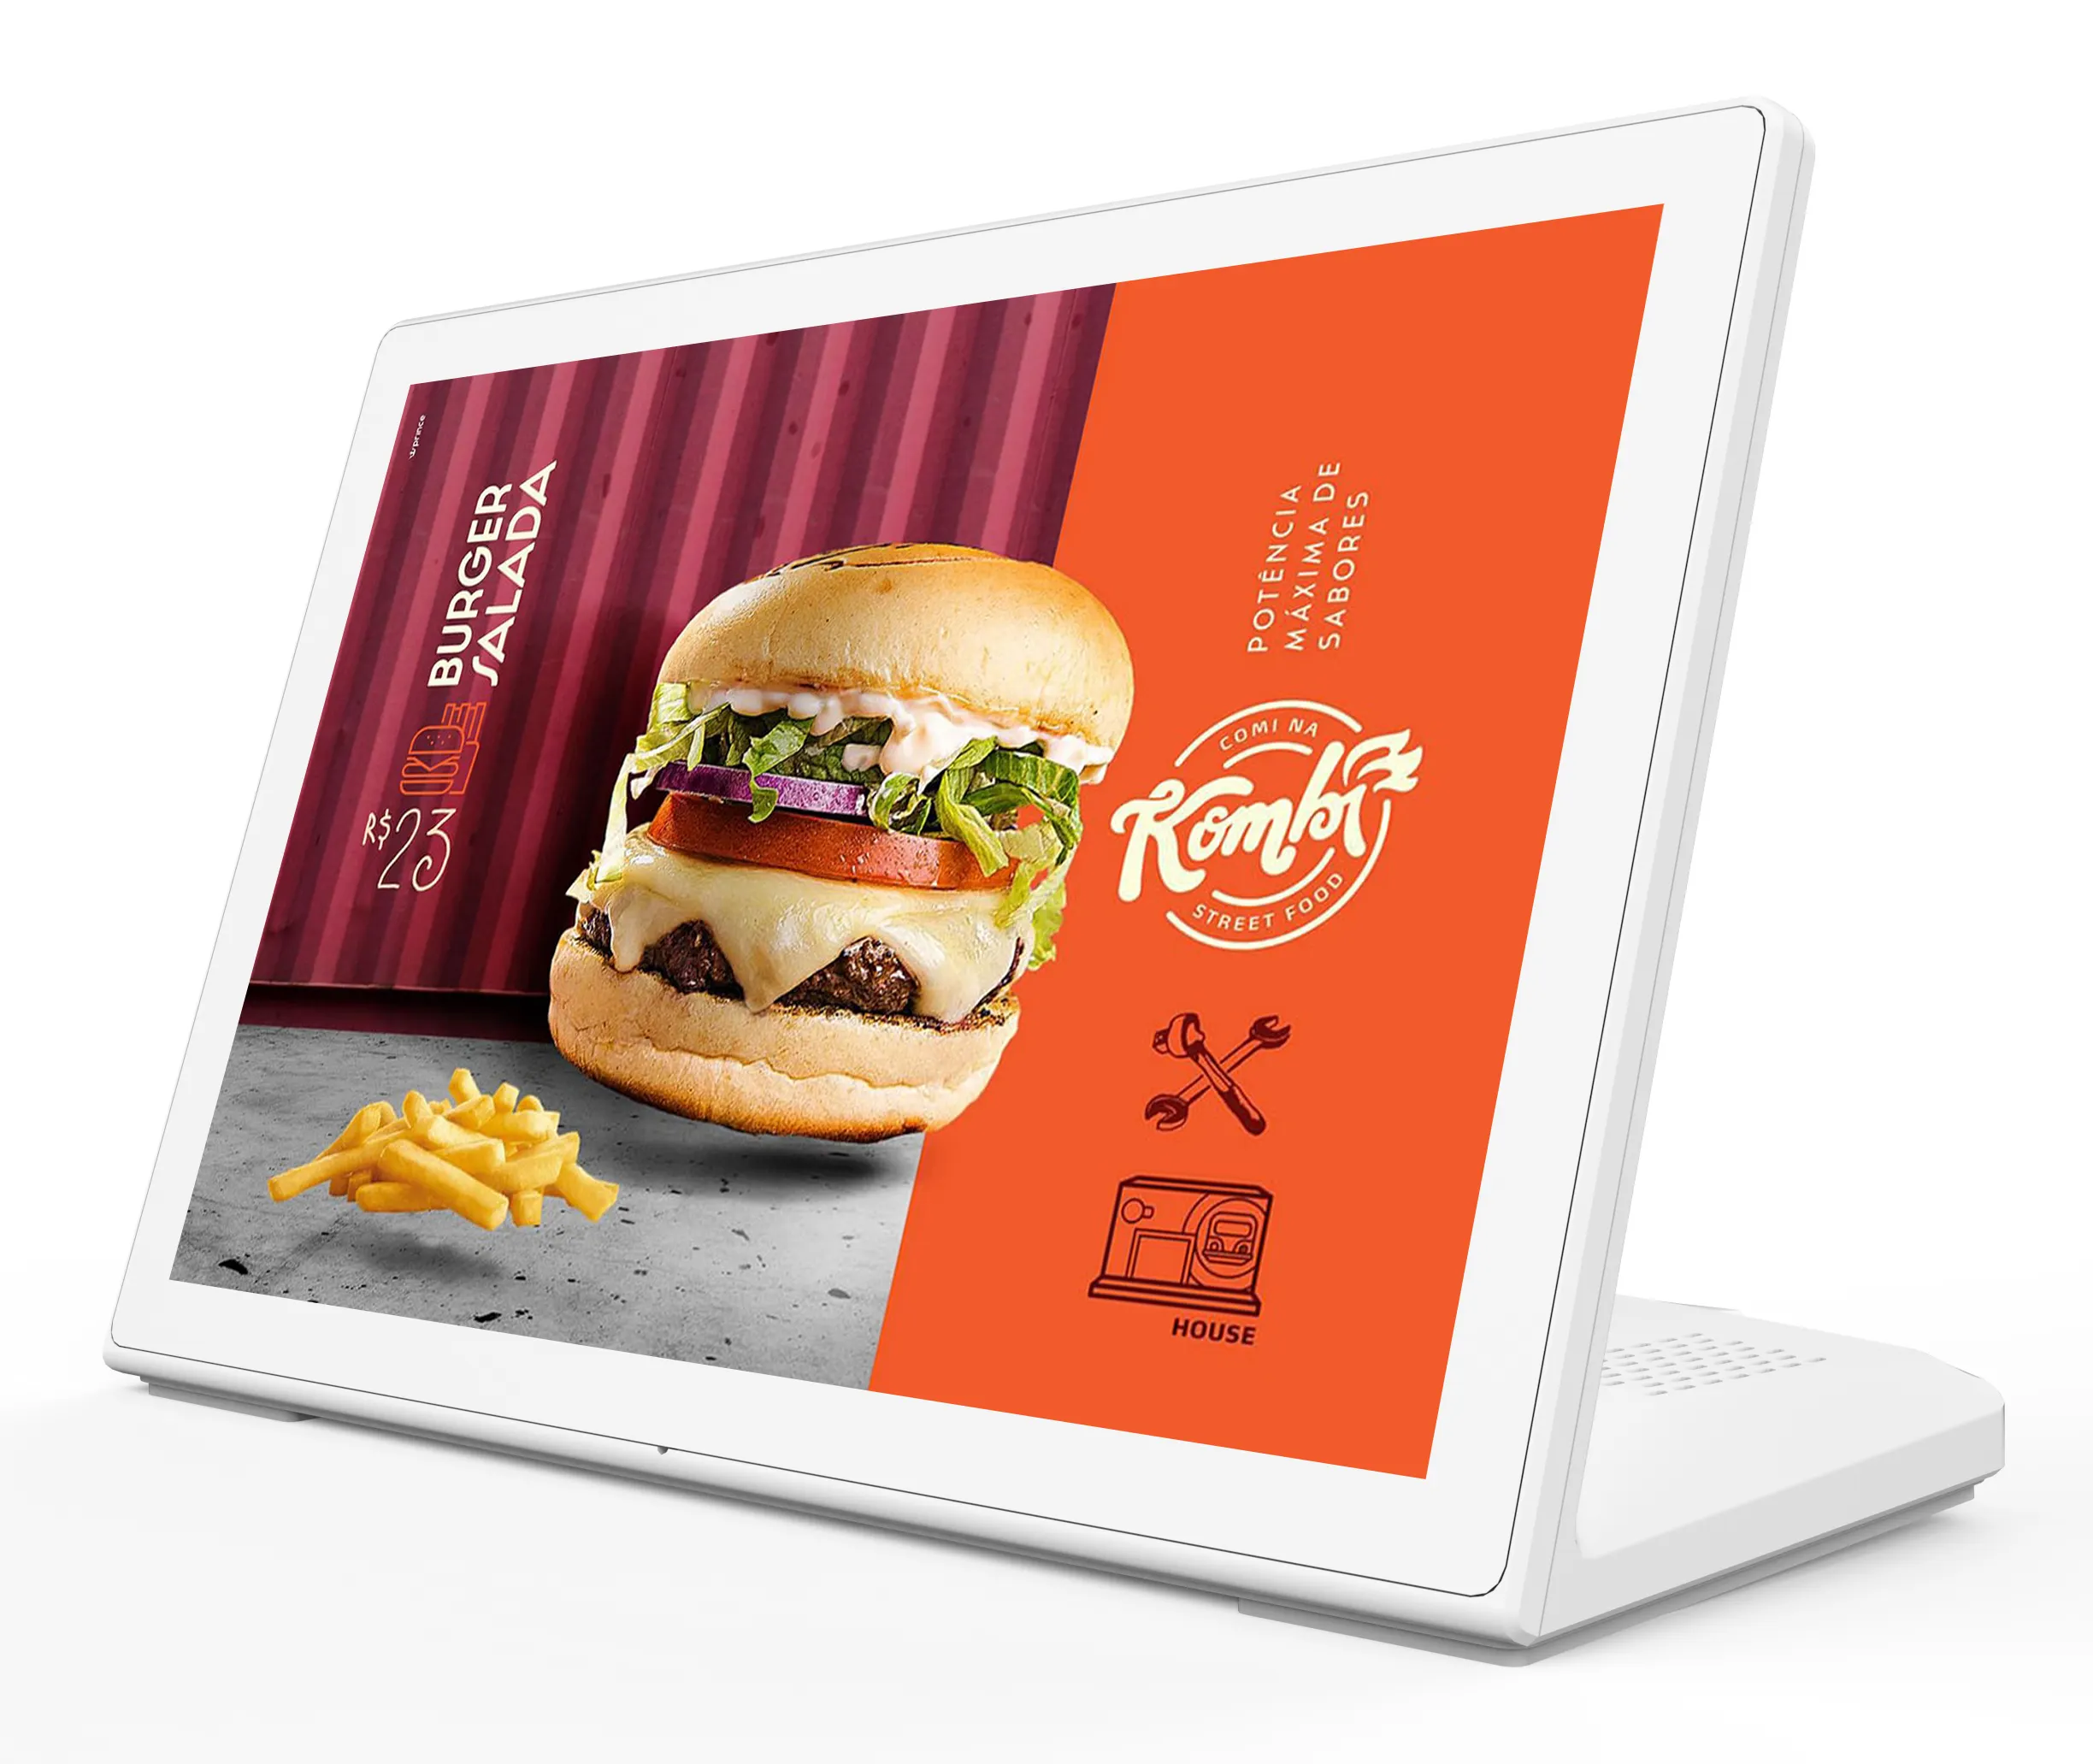 Tablet Touch Tablet Android pc 10.1 pollici Digital Signage RK3288 Android 8.1 10 pollici tipo L tablet pc per ristorante Menu cibo